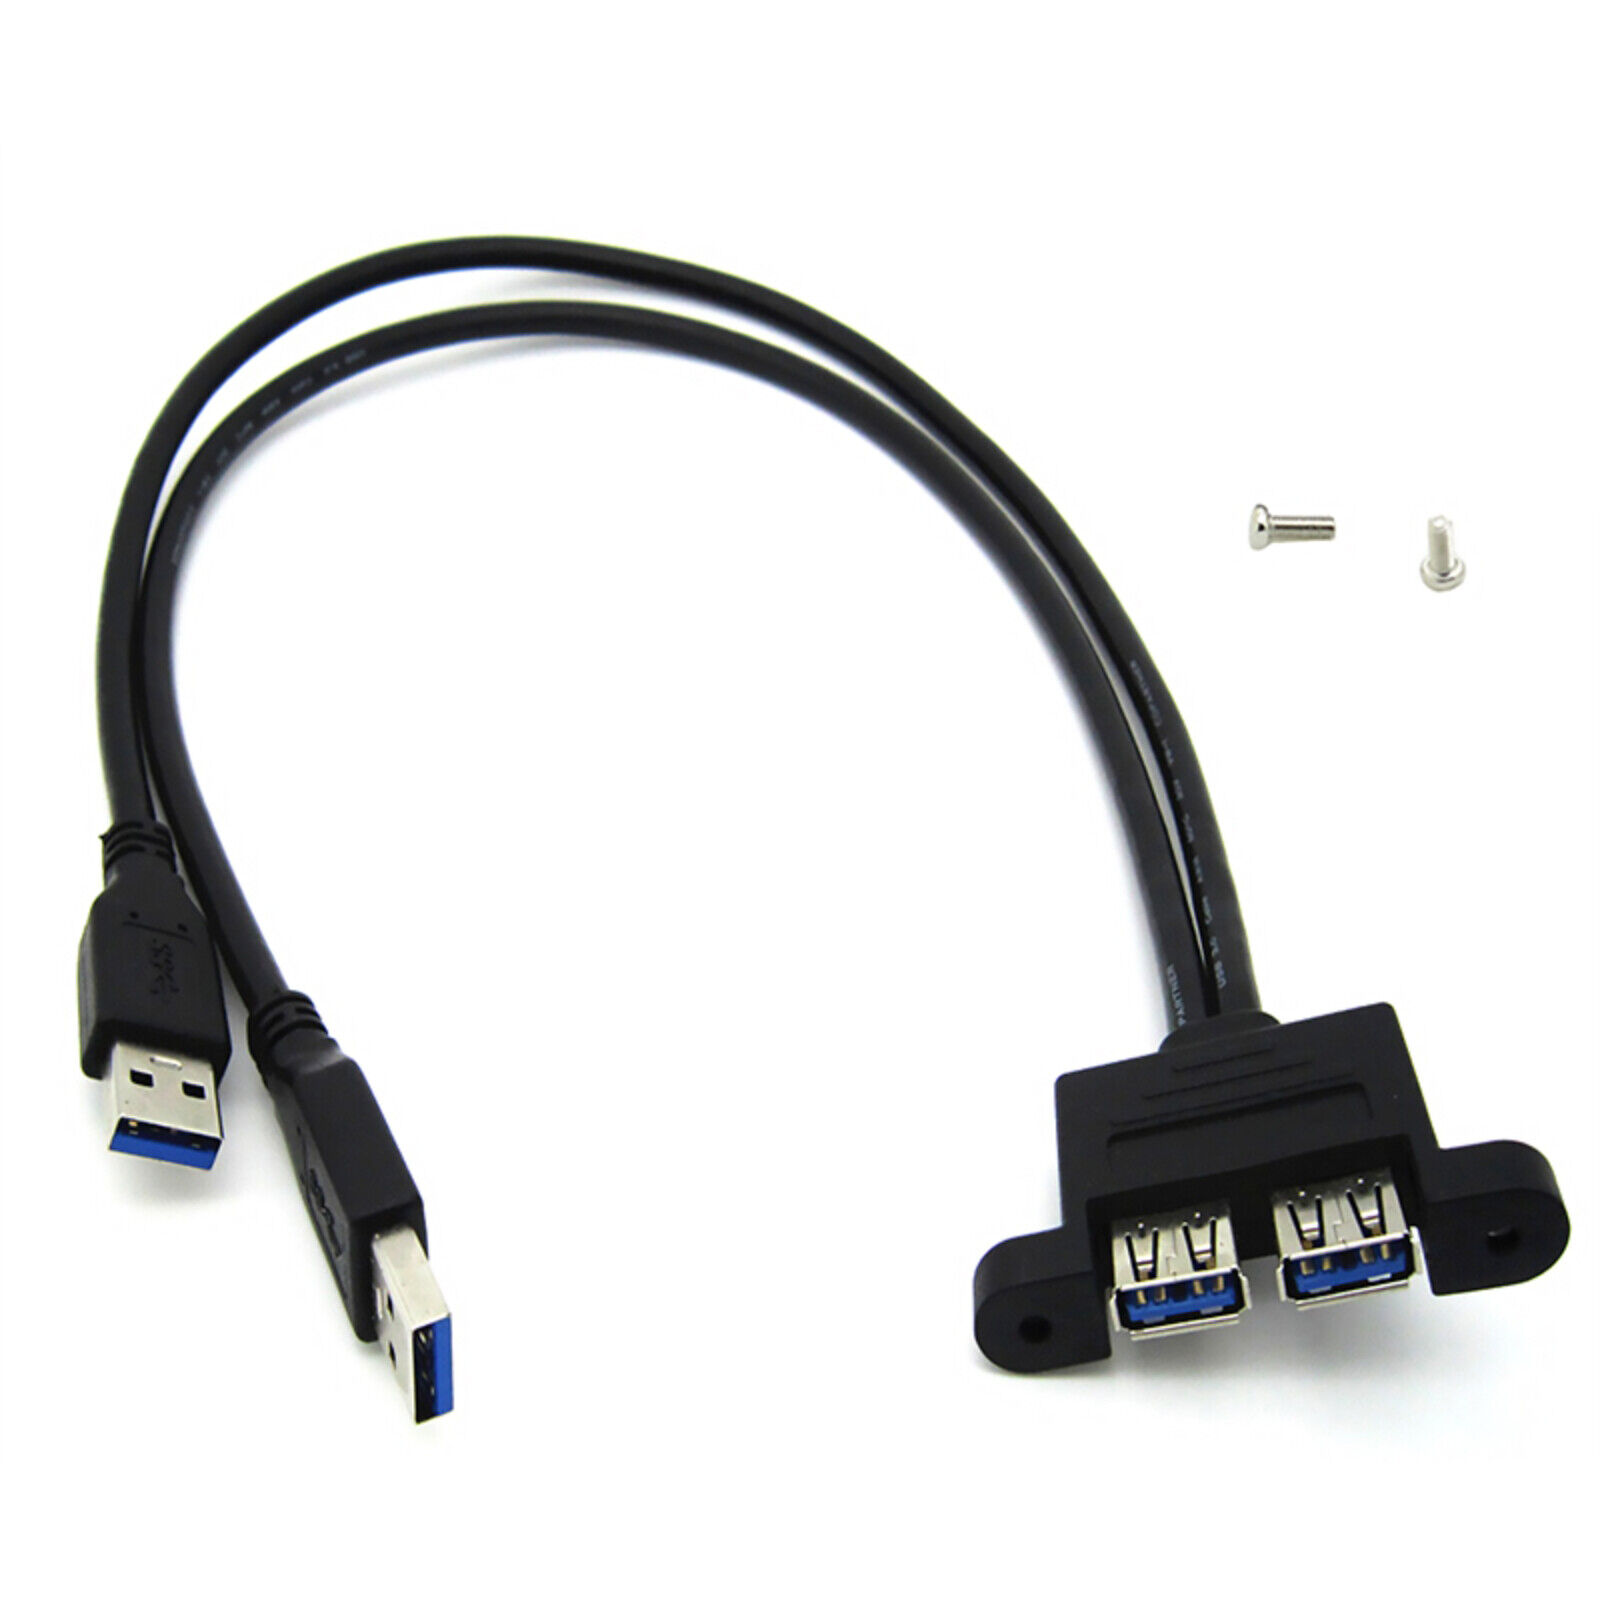 30cm Dual USB 3.0 A Male to USB 3.0 Female Extension Cable Panel Mount Adapter